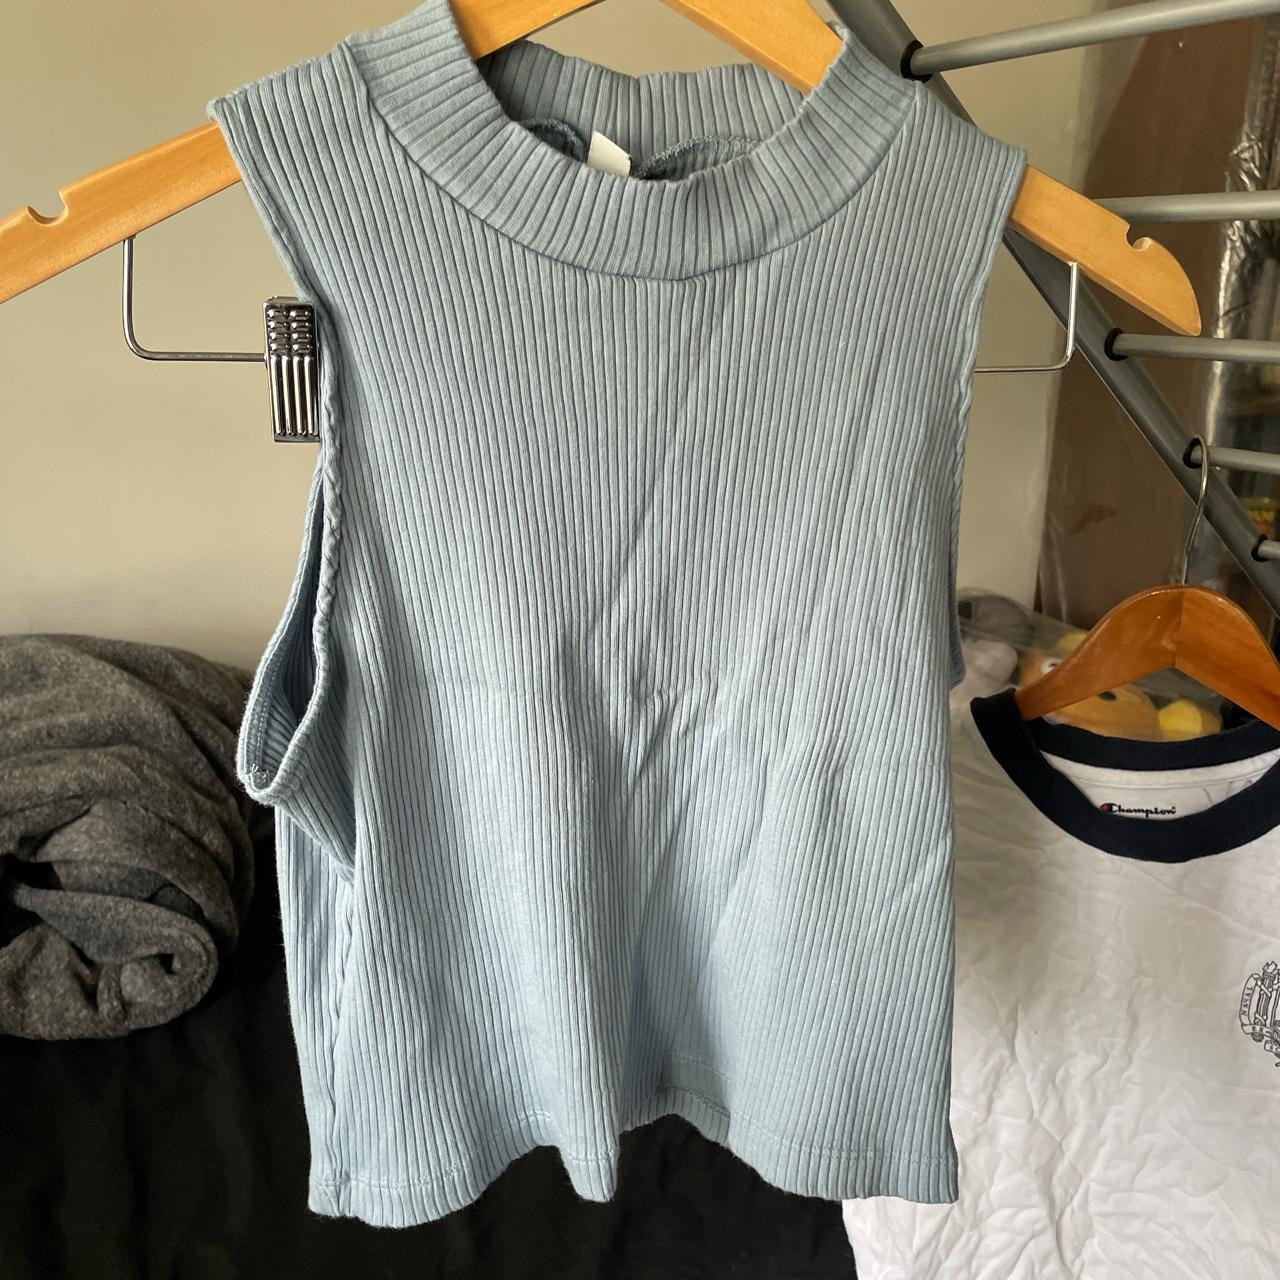 Women's Sonoma stripped sweater Super soft and - Depop